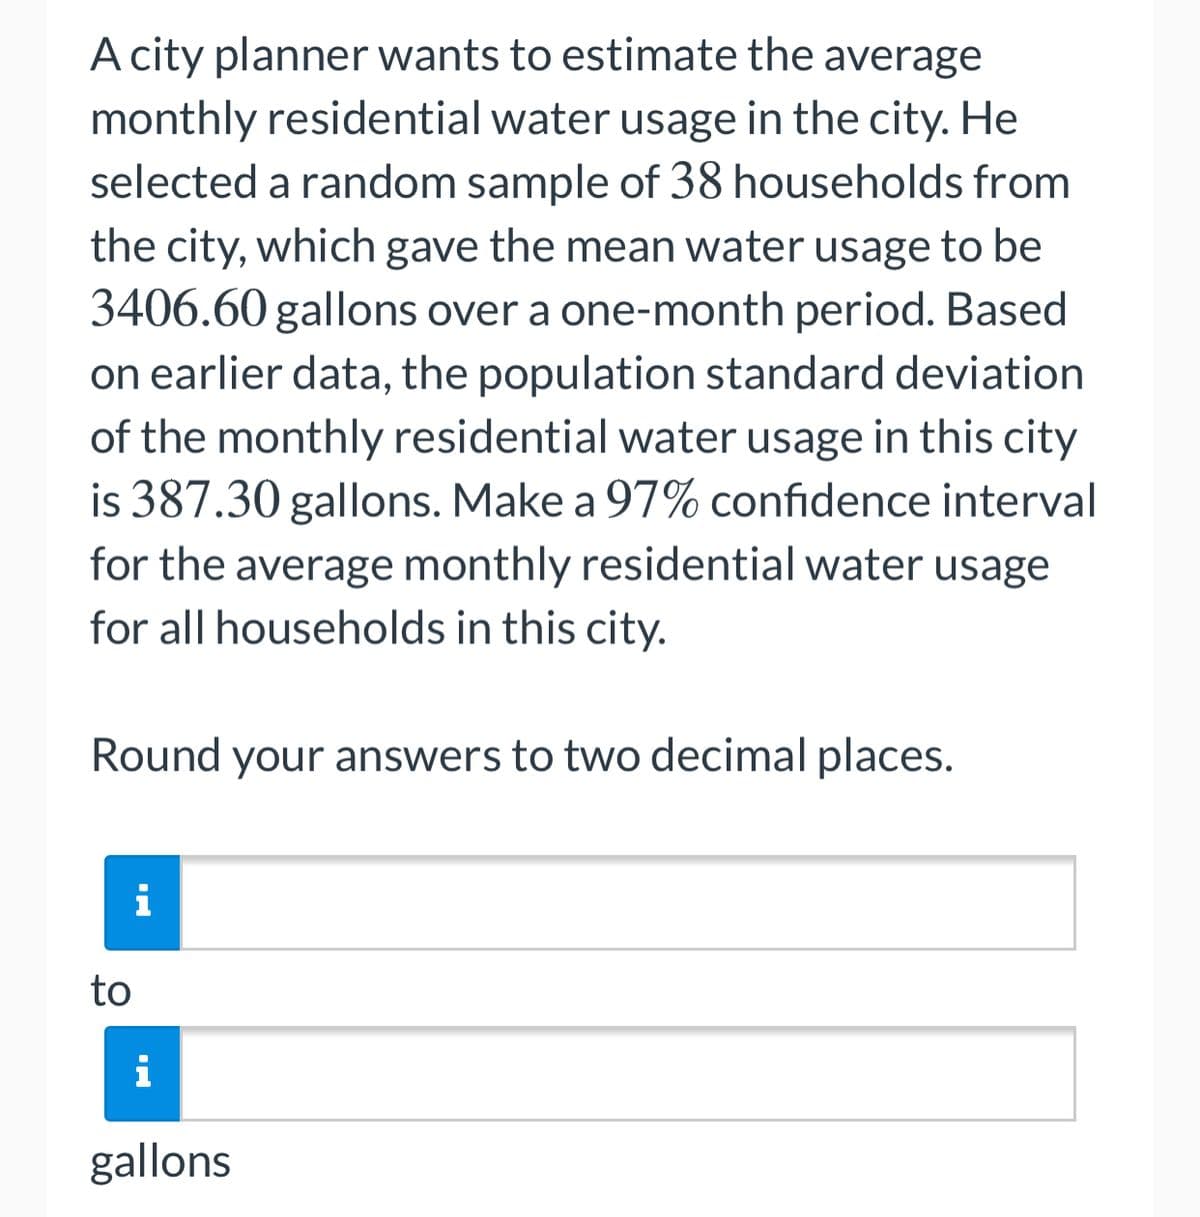 A city planner wants to estimate the average
monthly residential water usage in the city. He
selected a random sample of 38 households from
the city, which gave the mean water usage to be
3406.60 gallons over a one-month period. Based
on earlier data, the population standard deviation
of the monthly residential water usage in this city
is 387.30 gallons. Make a 97% confidence interval
for the average monthly residential water usage
for all households in this city.
Round your answers to two decimal places.
i
to
i
gallons
